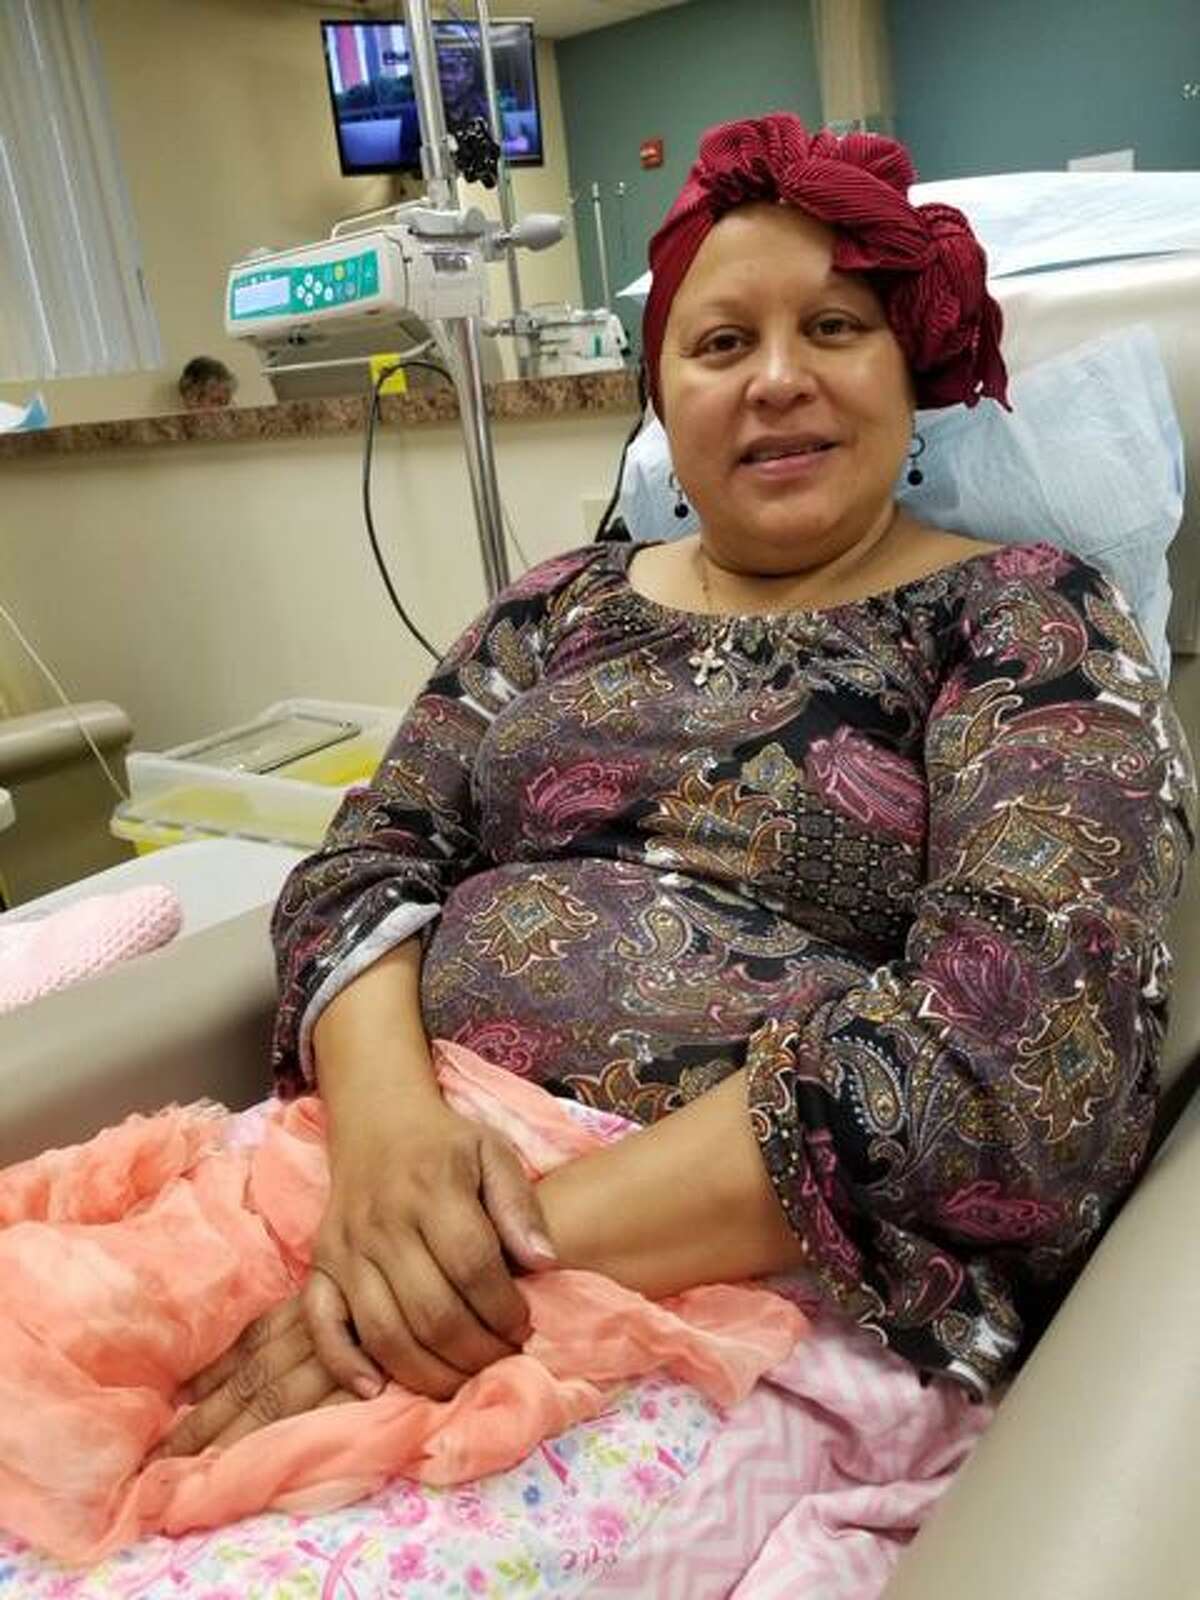 In Pearland, Inez Avilez was planning the next battle in her own fight against breast cancer, undergoing rounds of chemo and awaiting a scheduled mastectomy in early June. For cancer patients like Alivez and Monica Iparrea, uncertainty was already part of their daily lives